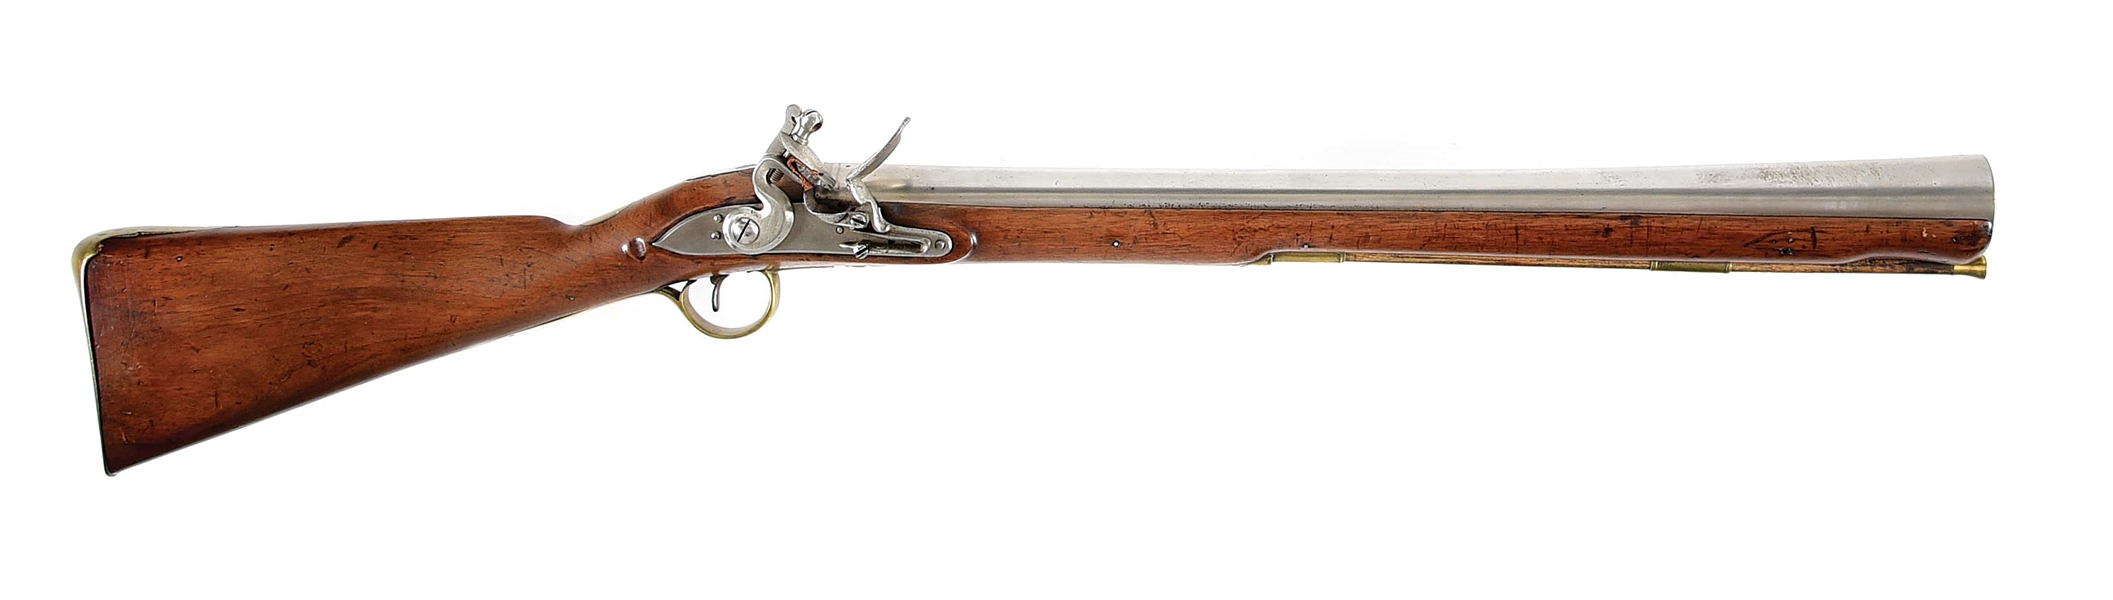 (A) LARGE BRITISH FLINTLOCK BLUNDERBUSS WITH SIDE-MOUNTED BAYONET, ATTRIBUTED TO WATERS.